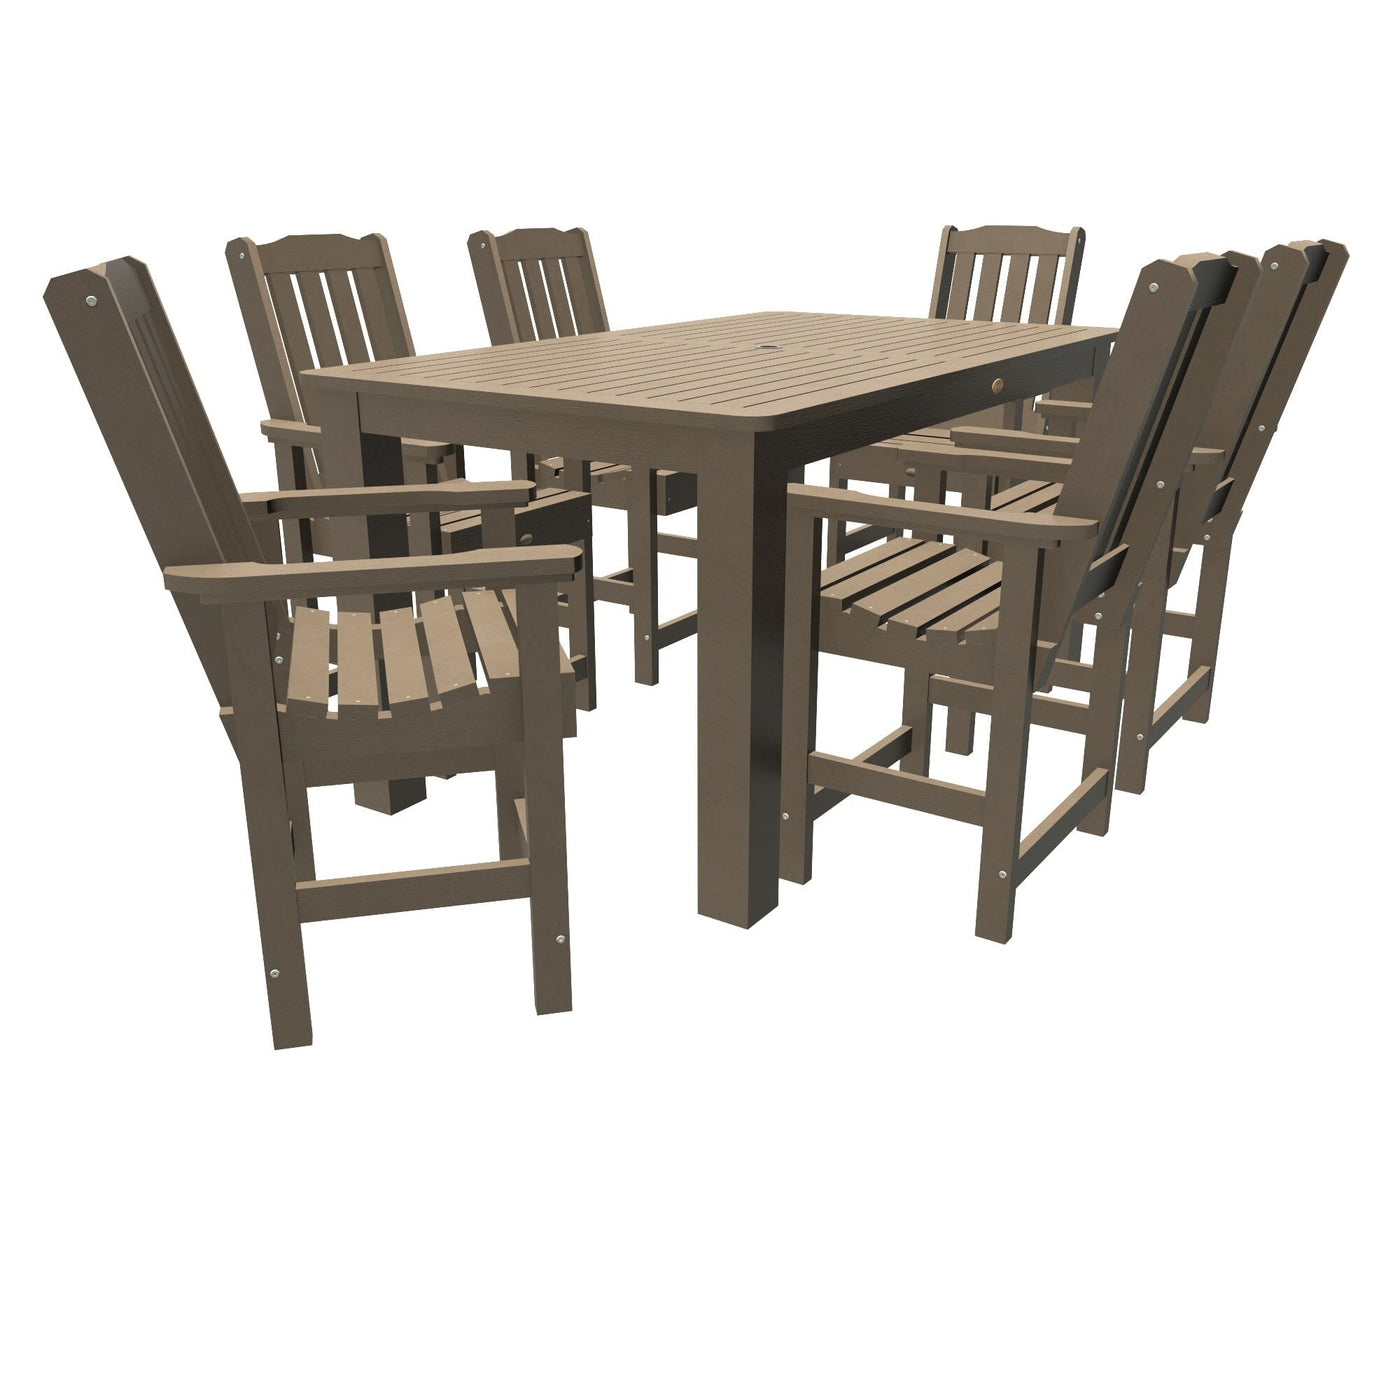 Lehigh 7pc Rectangular Outdoor Dining Set 42in x 72in - Counter Height Dining Highwood USA Woodland Brown 